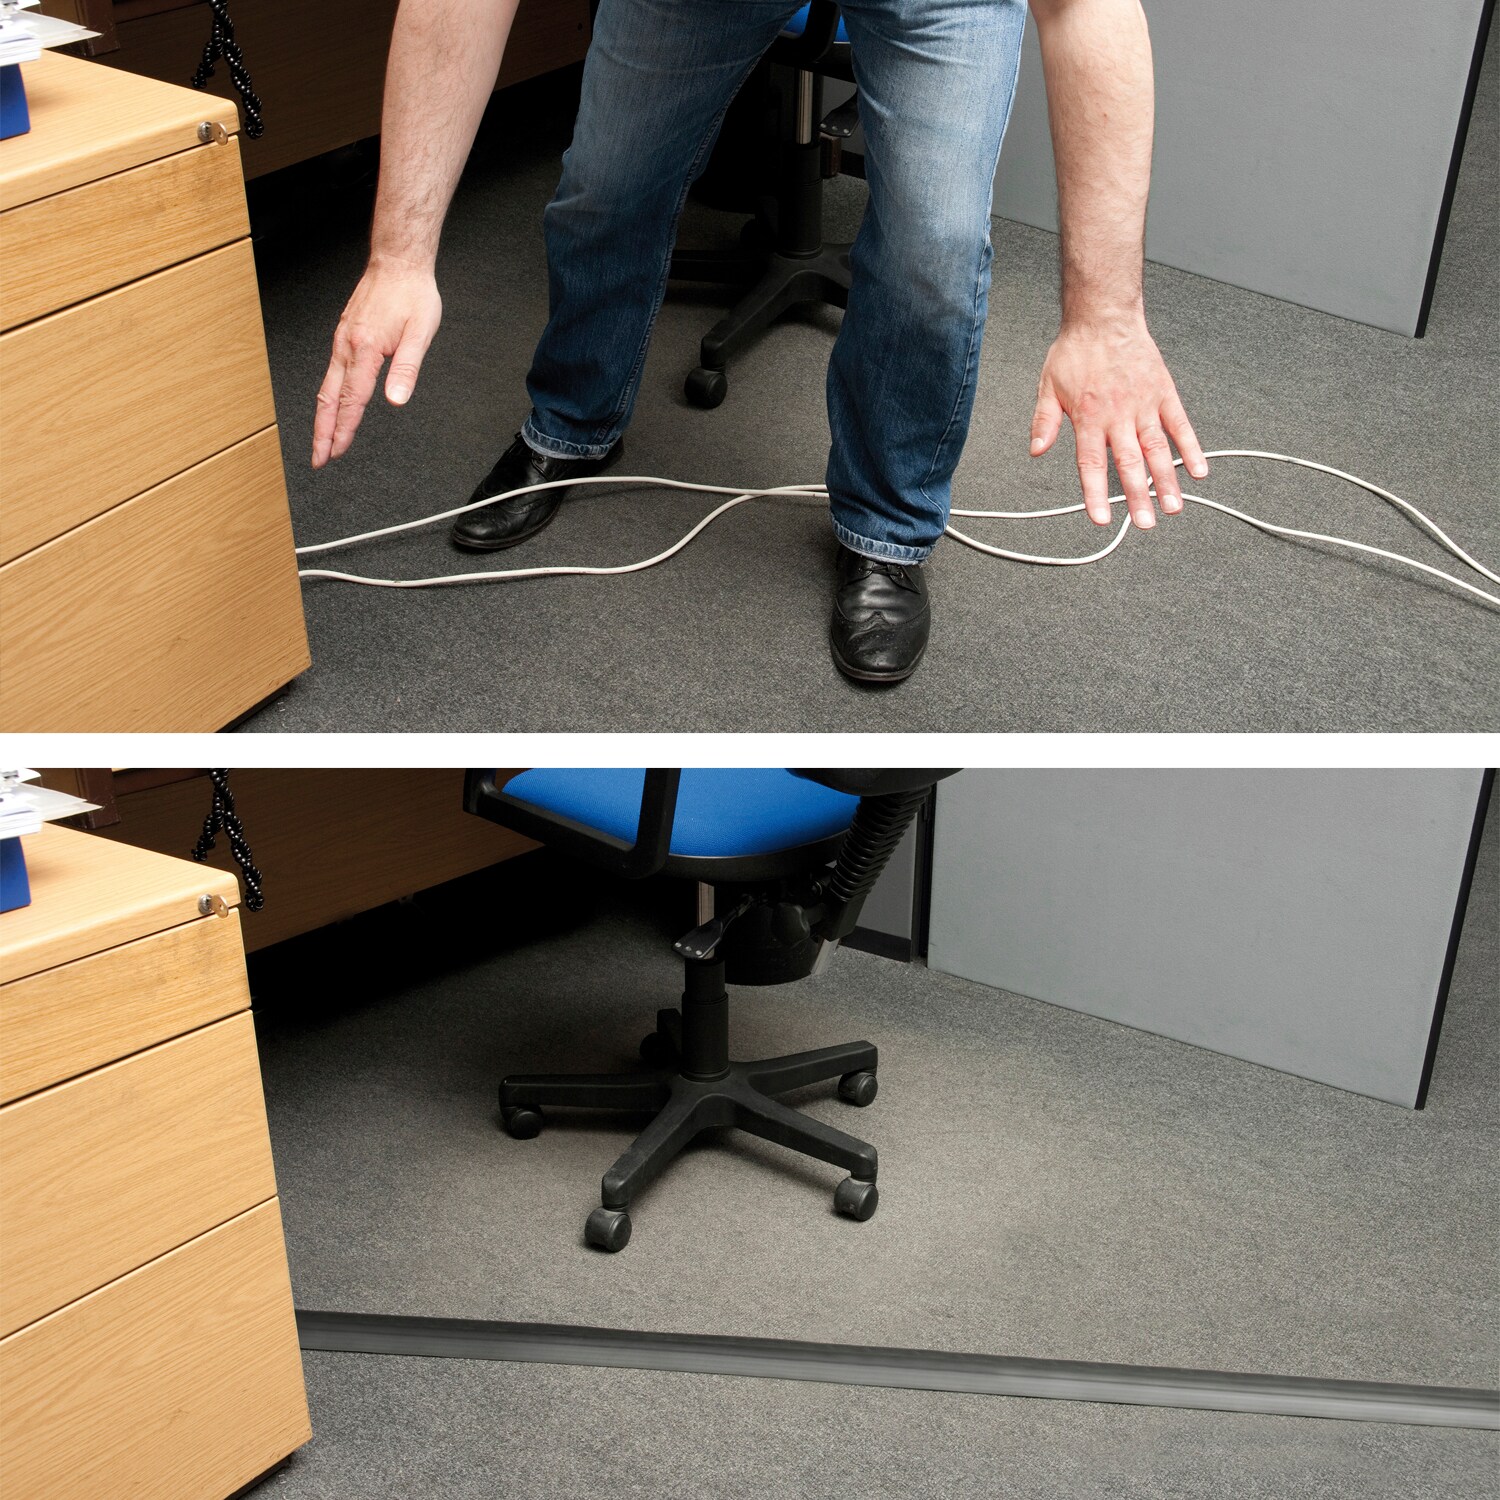 3” Width X 10’ Length Floor Cable Cover for Commercial Office Carpet Only D-Line Cable Grip Strip 10 Feet, Light Grey Hold Cords in Place Under Desks and Around The Perimeter of Rooms